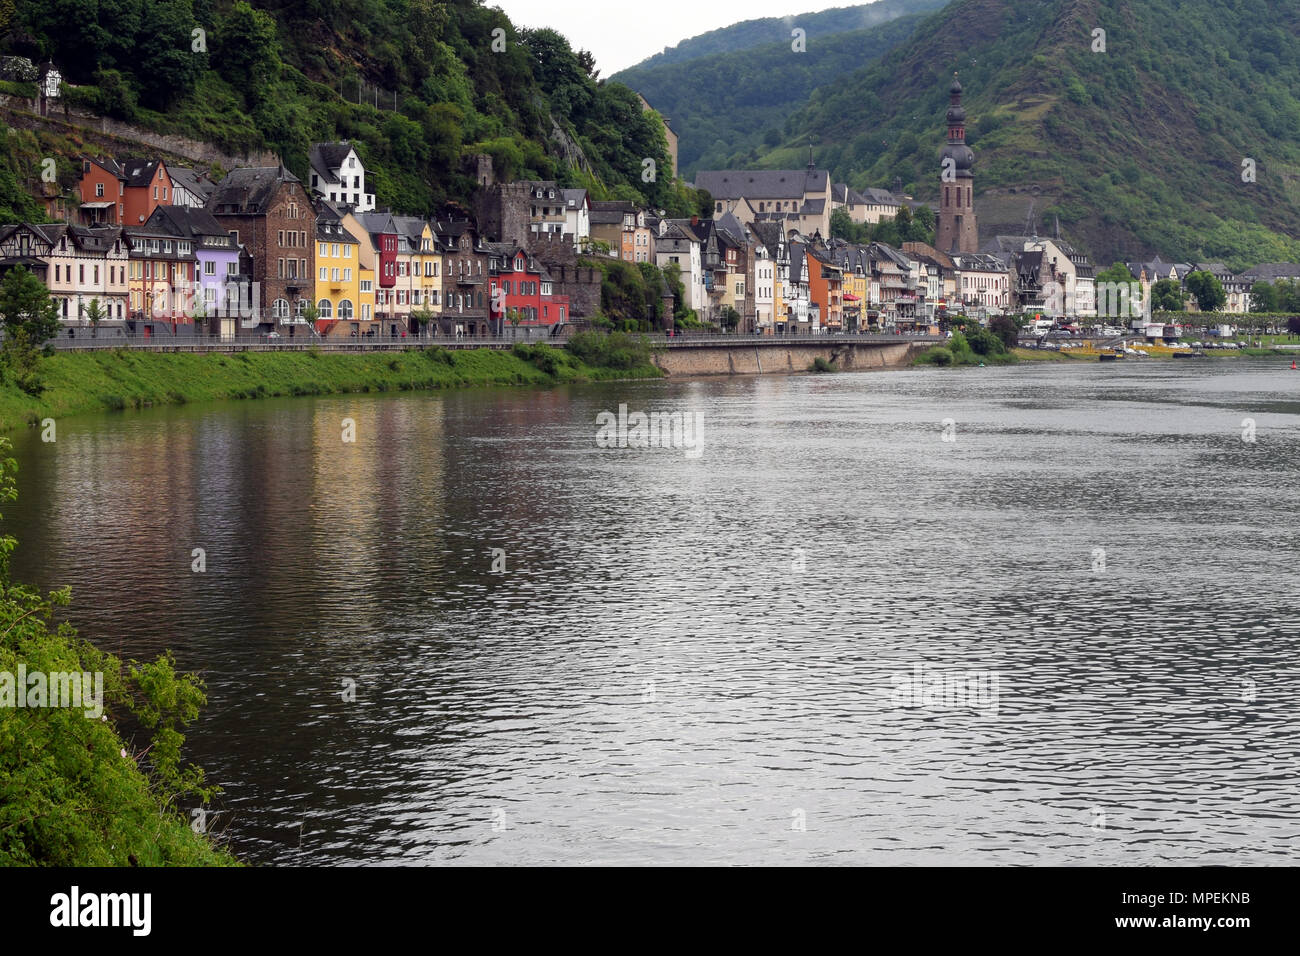 Moselle river and city of Cochem in Moselle valley, Germany. Stock Photo